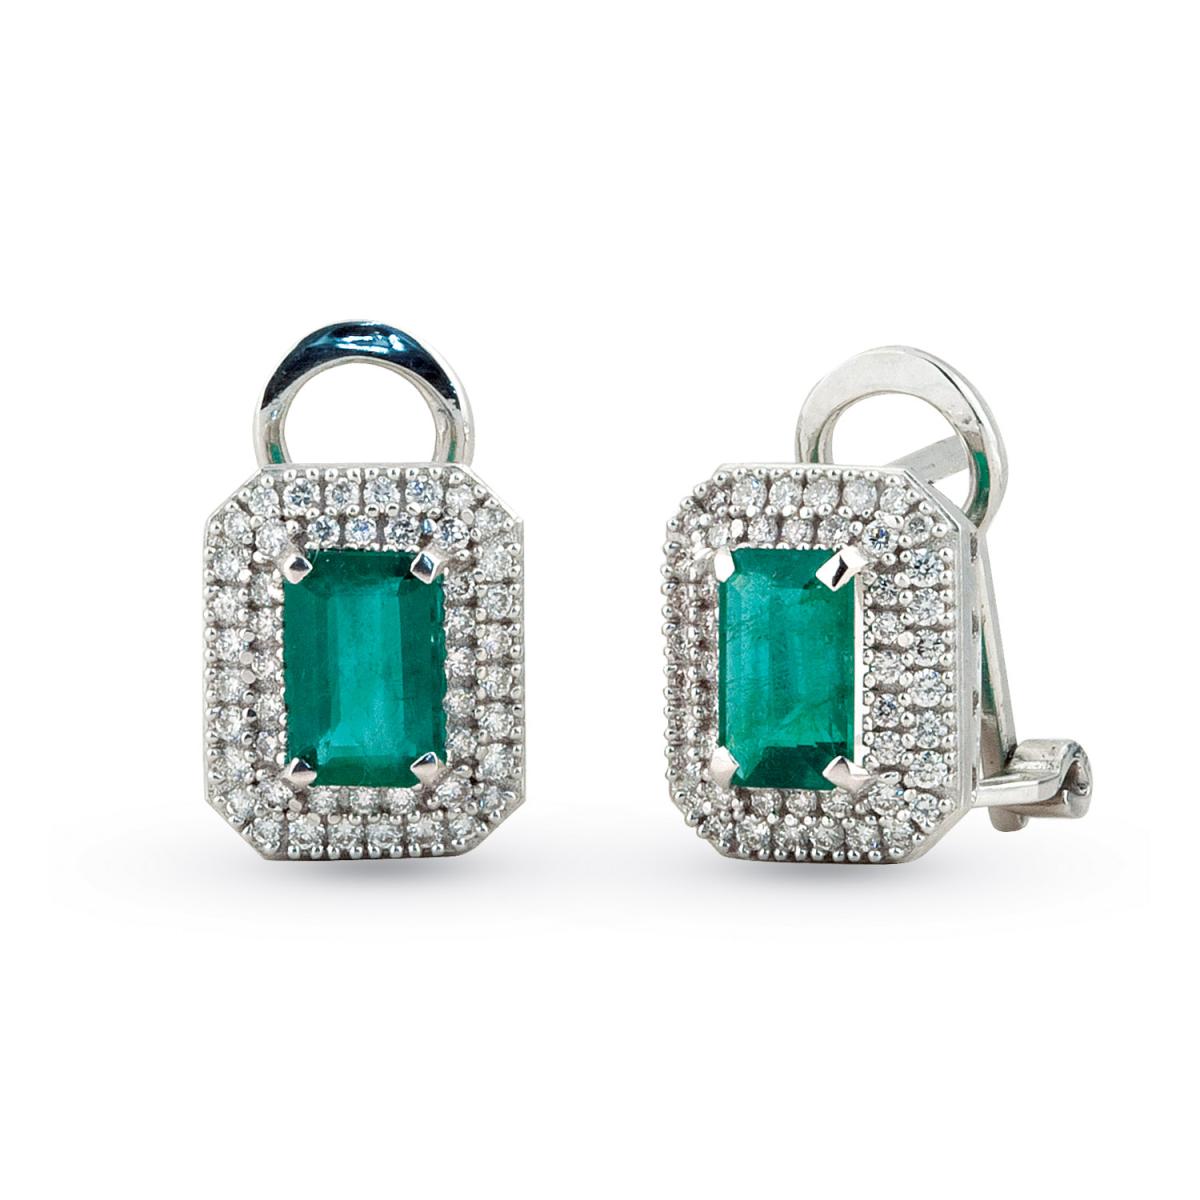 Clip earrings in 18kt white gold with diamonds and natural precious stone - OD260